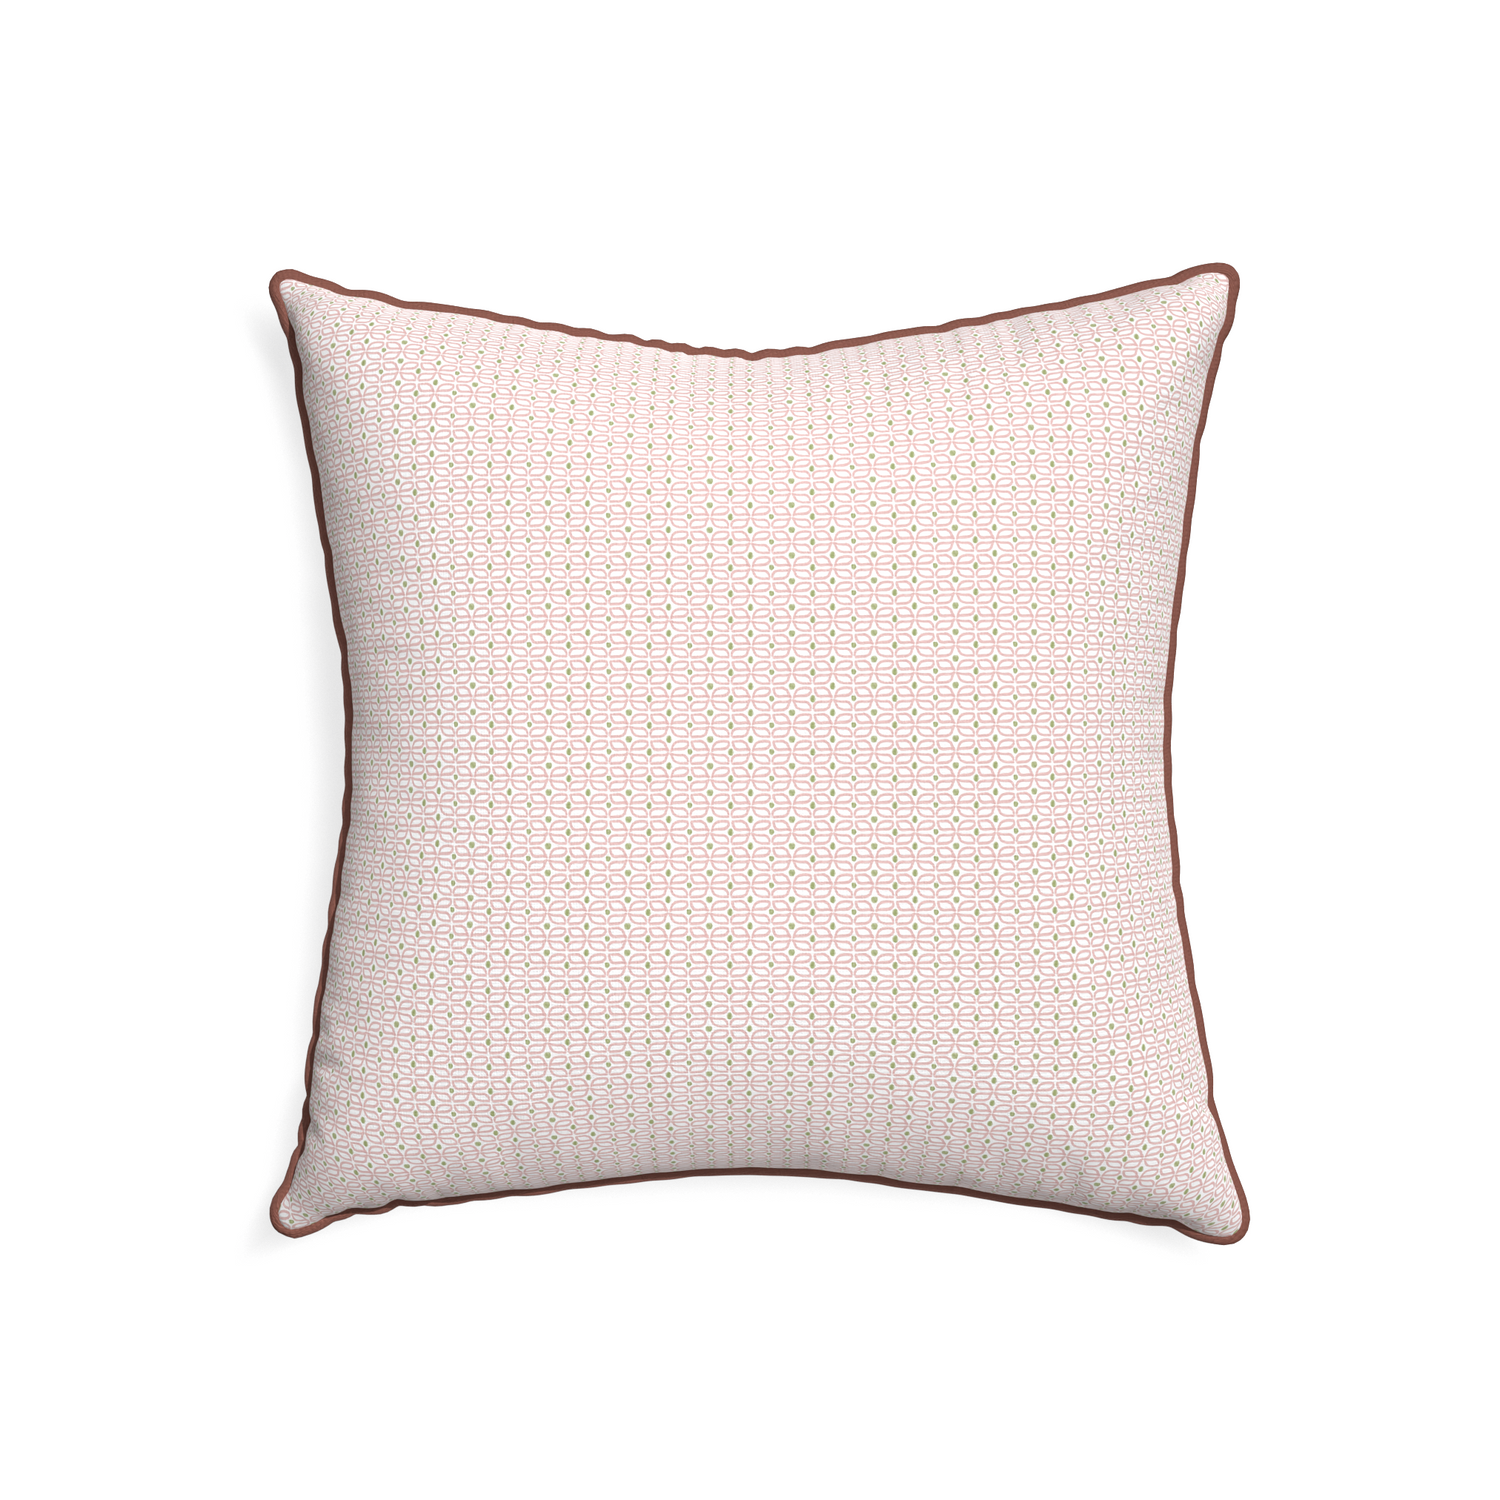 22-square loomi pink custom pink geometricpillow with w piping on white background